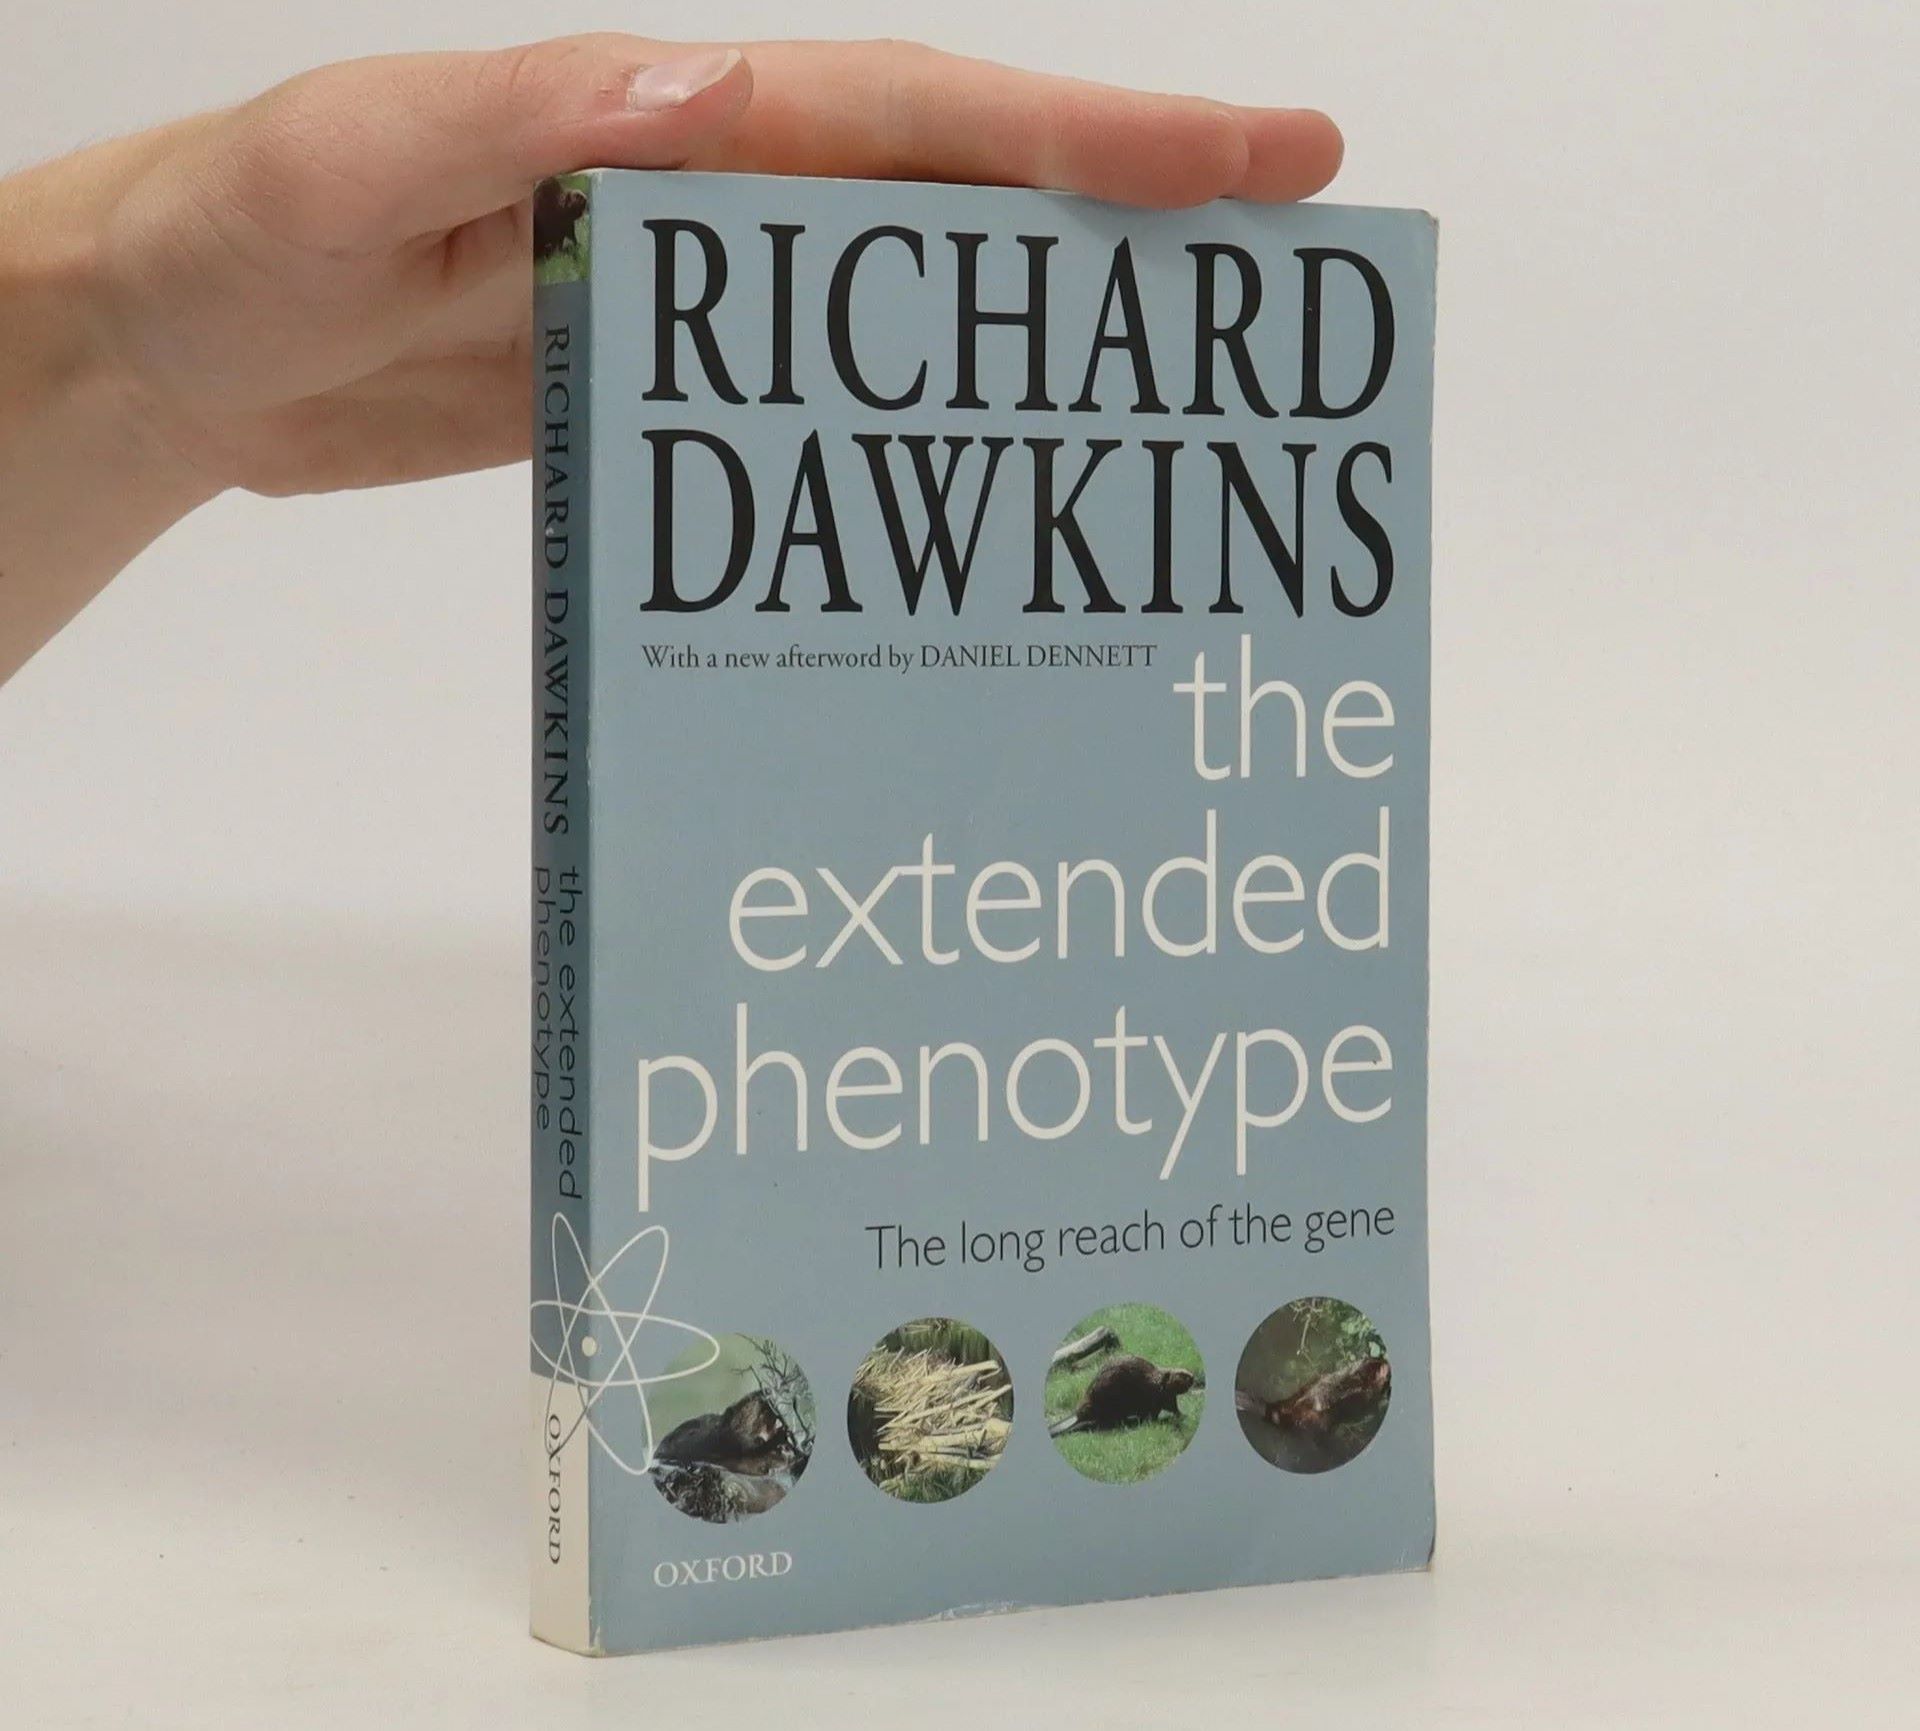 15-enigmatic-facts-about-the-extended-phenotype-richard-dawkins